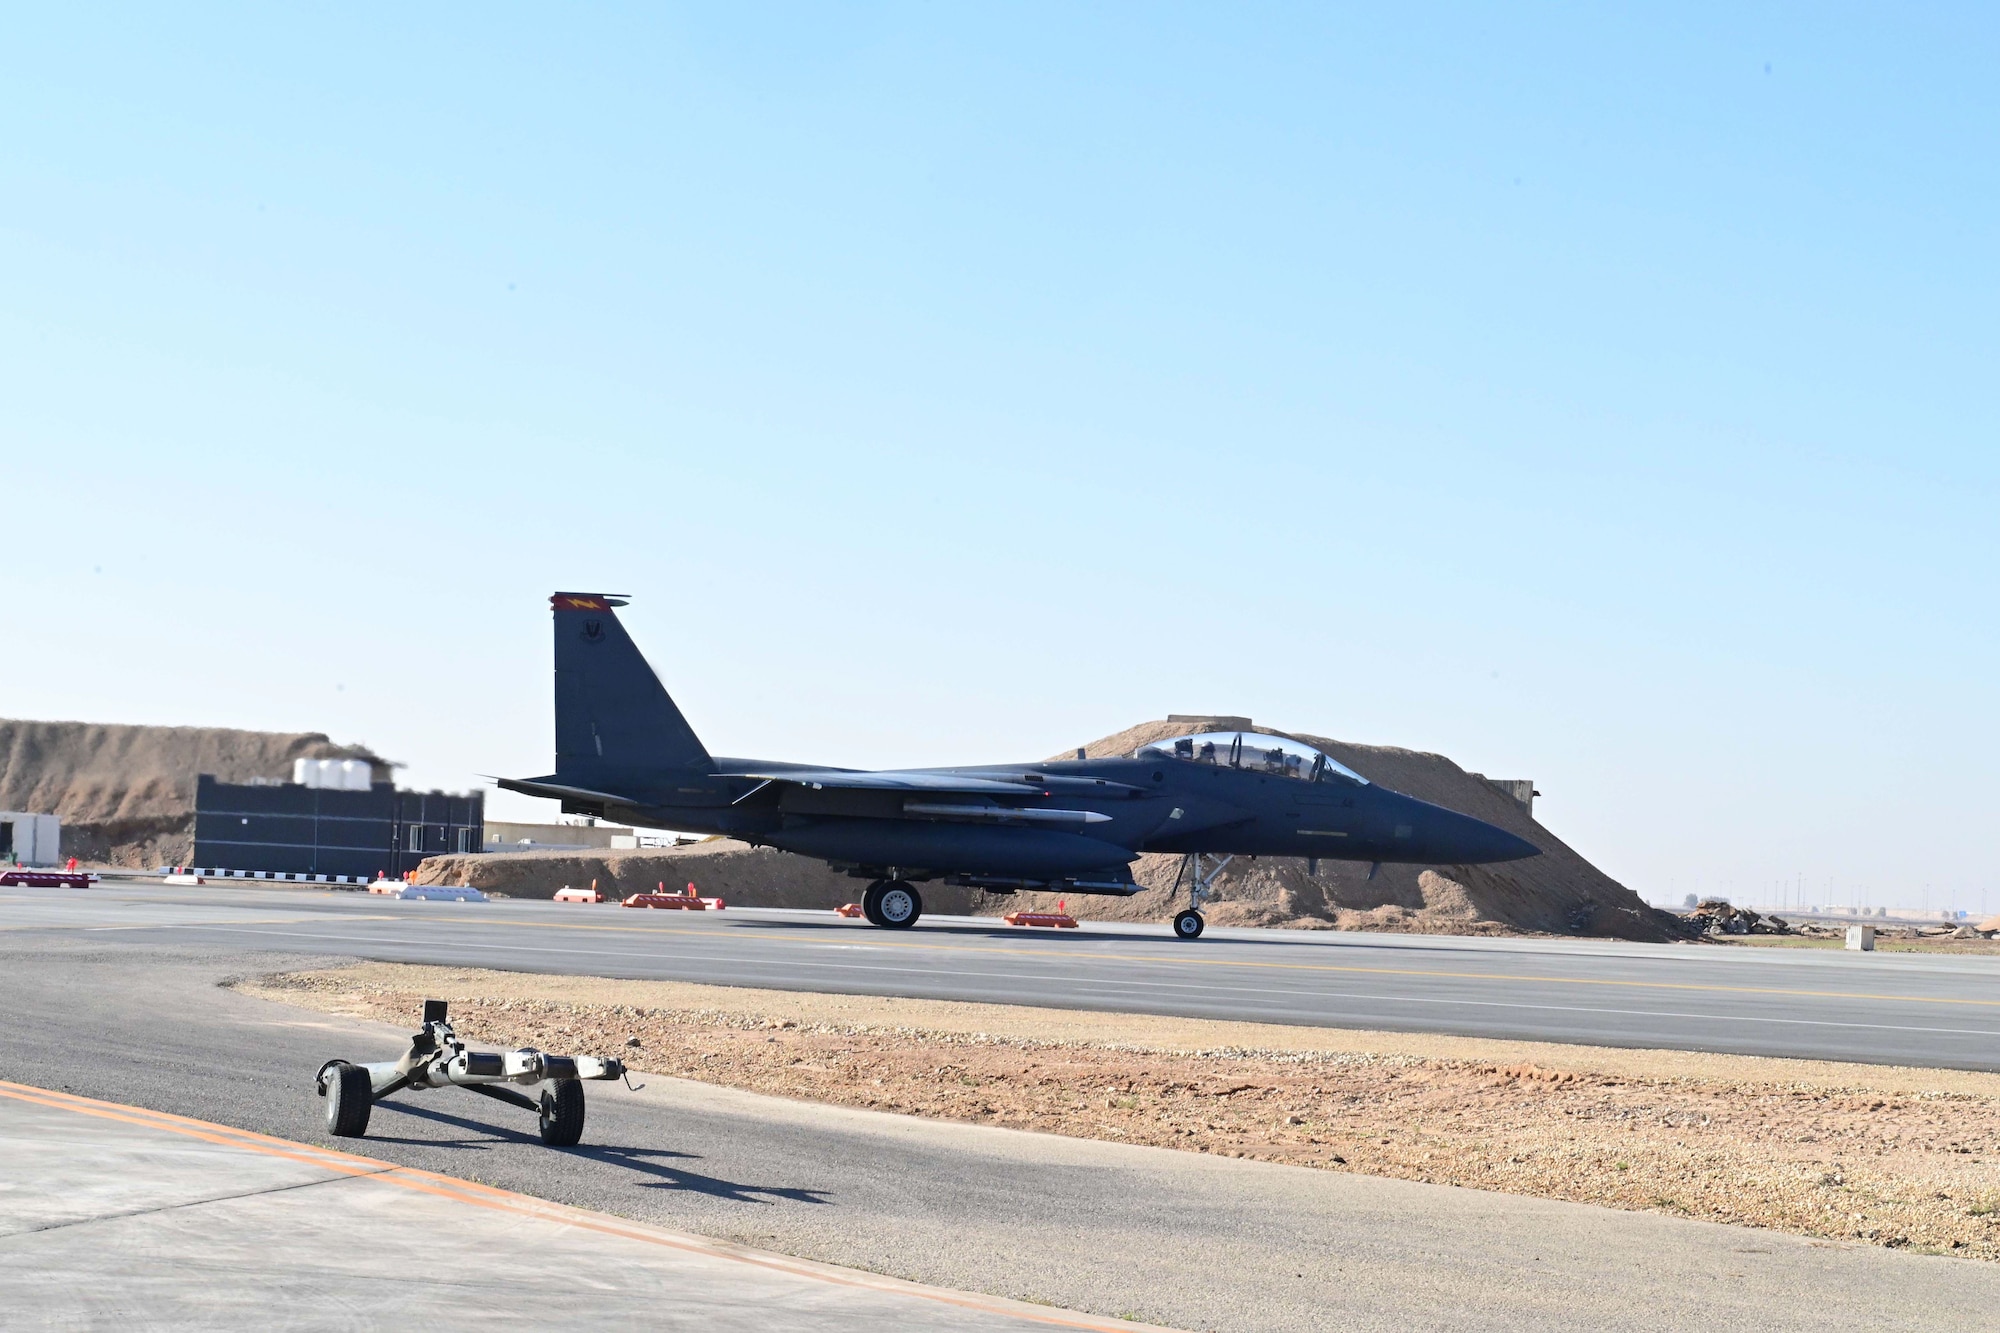 The jet was part of Operation Agile Spartan IV, a twice-annual exercise hosted by Ninth Air Force (Air Forces Central) to enhance Agile Combat Employment capabilities and strengthen regional partnerships.